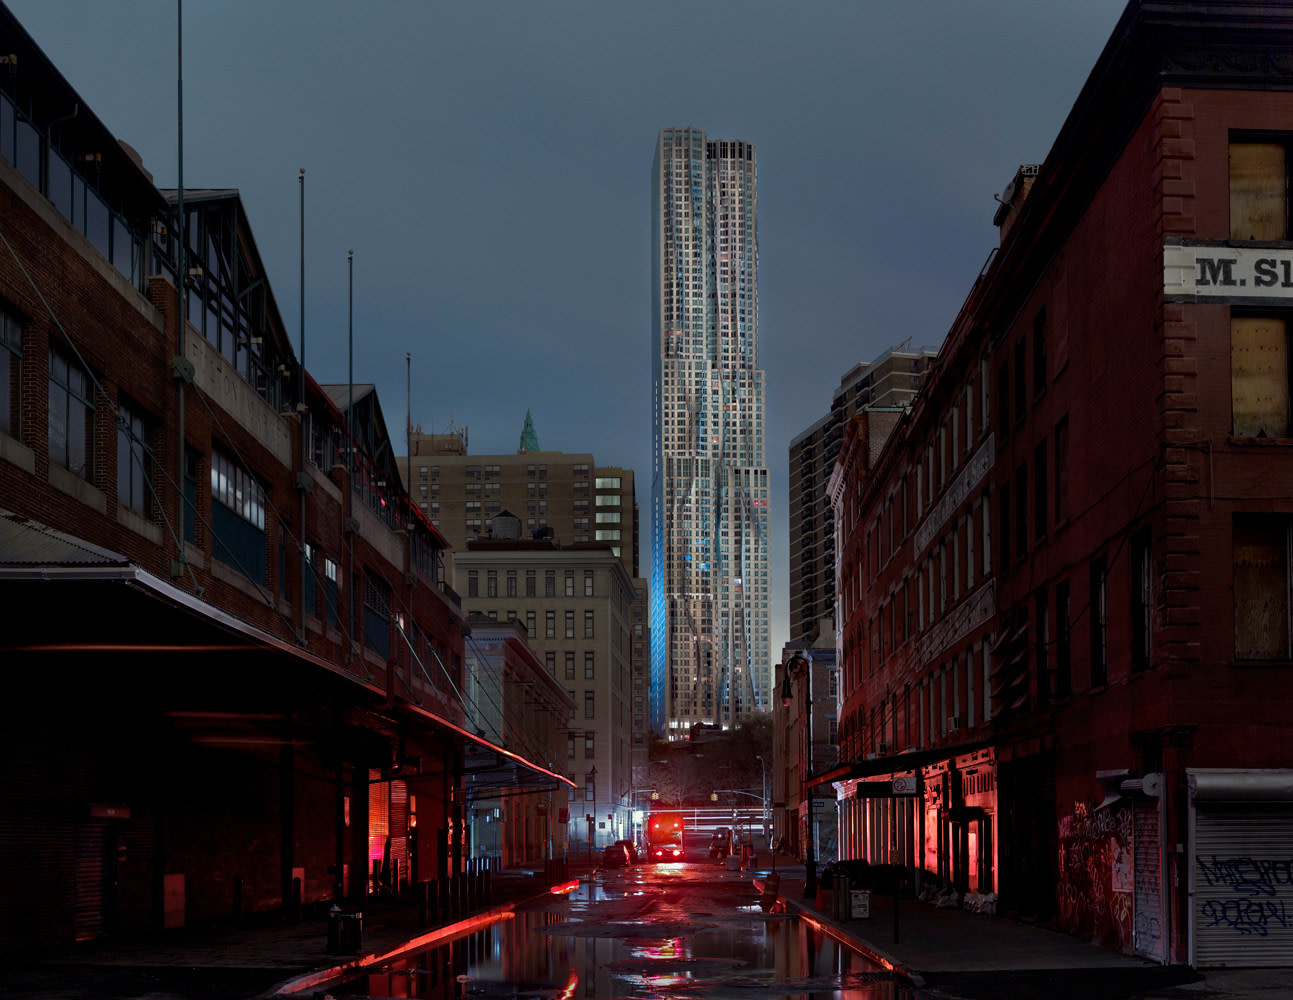 Photo of dark Manhattan street during a blackout, with a Fran Gehry skyscraper in the background.